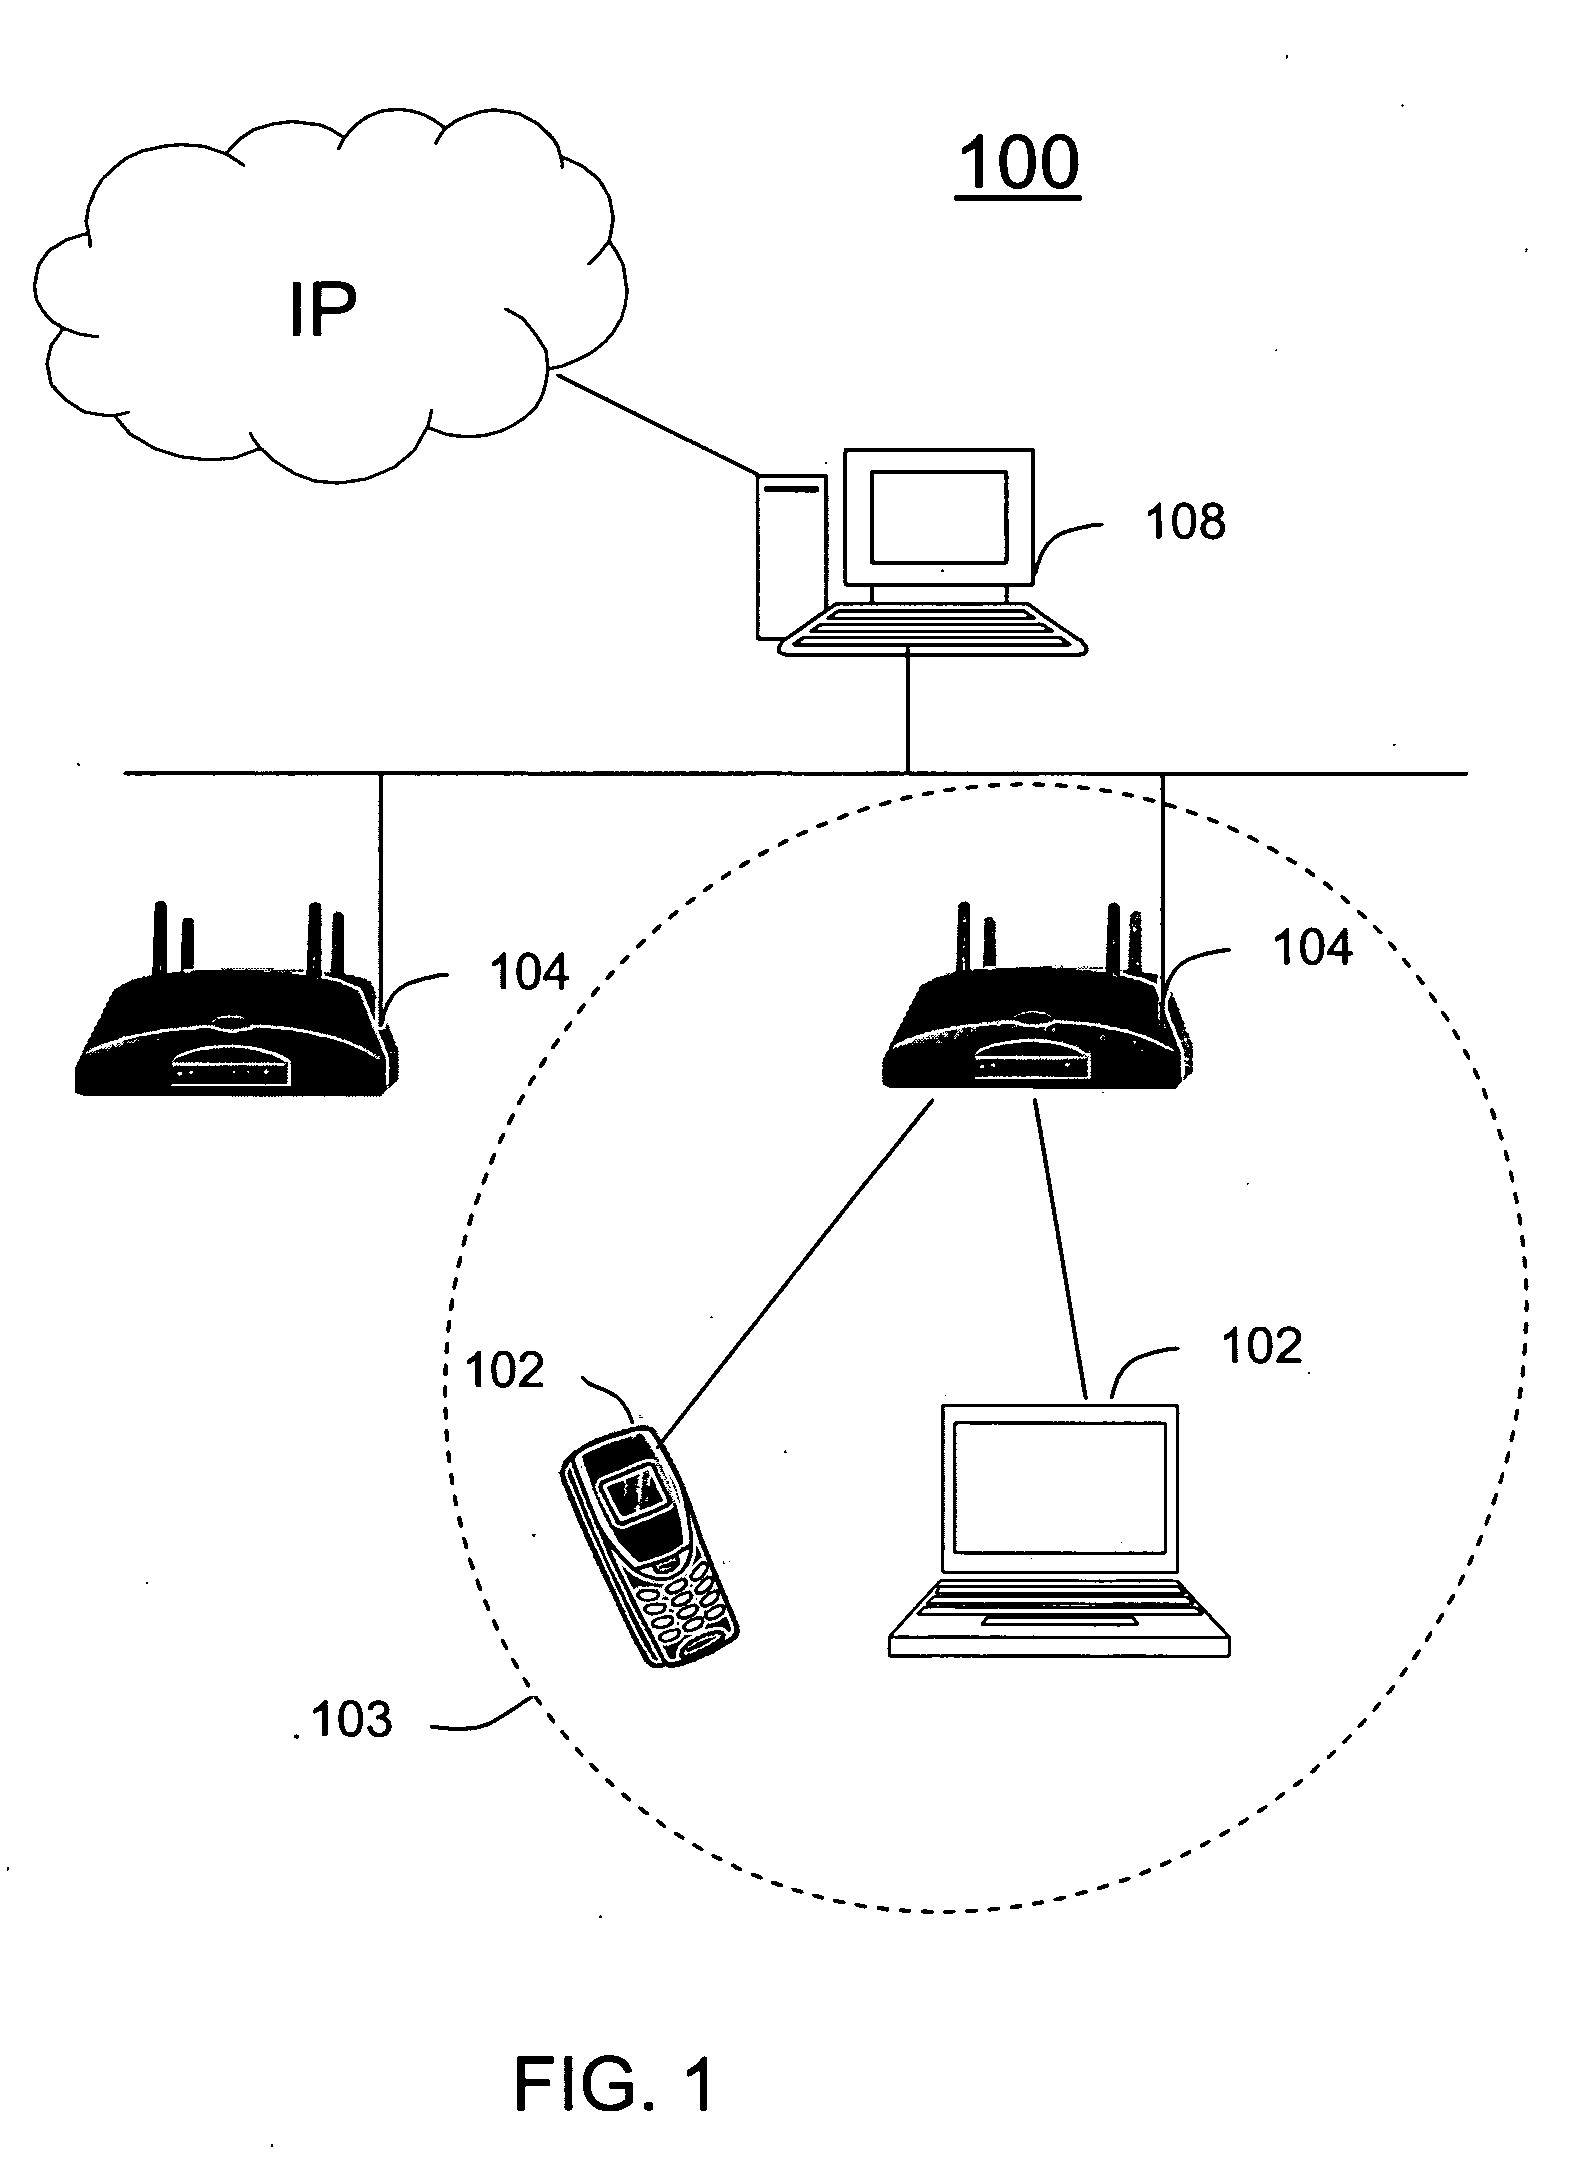 Method for packet polling in a WLAN